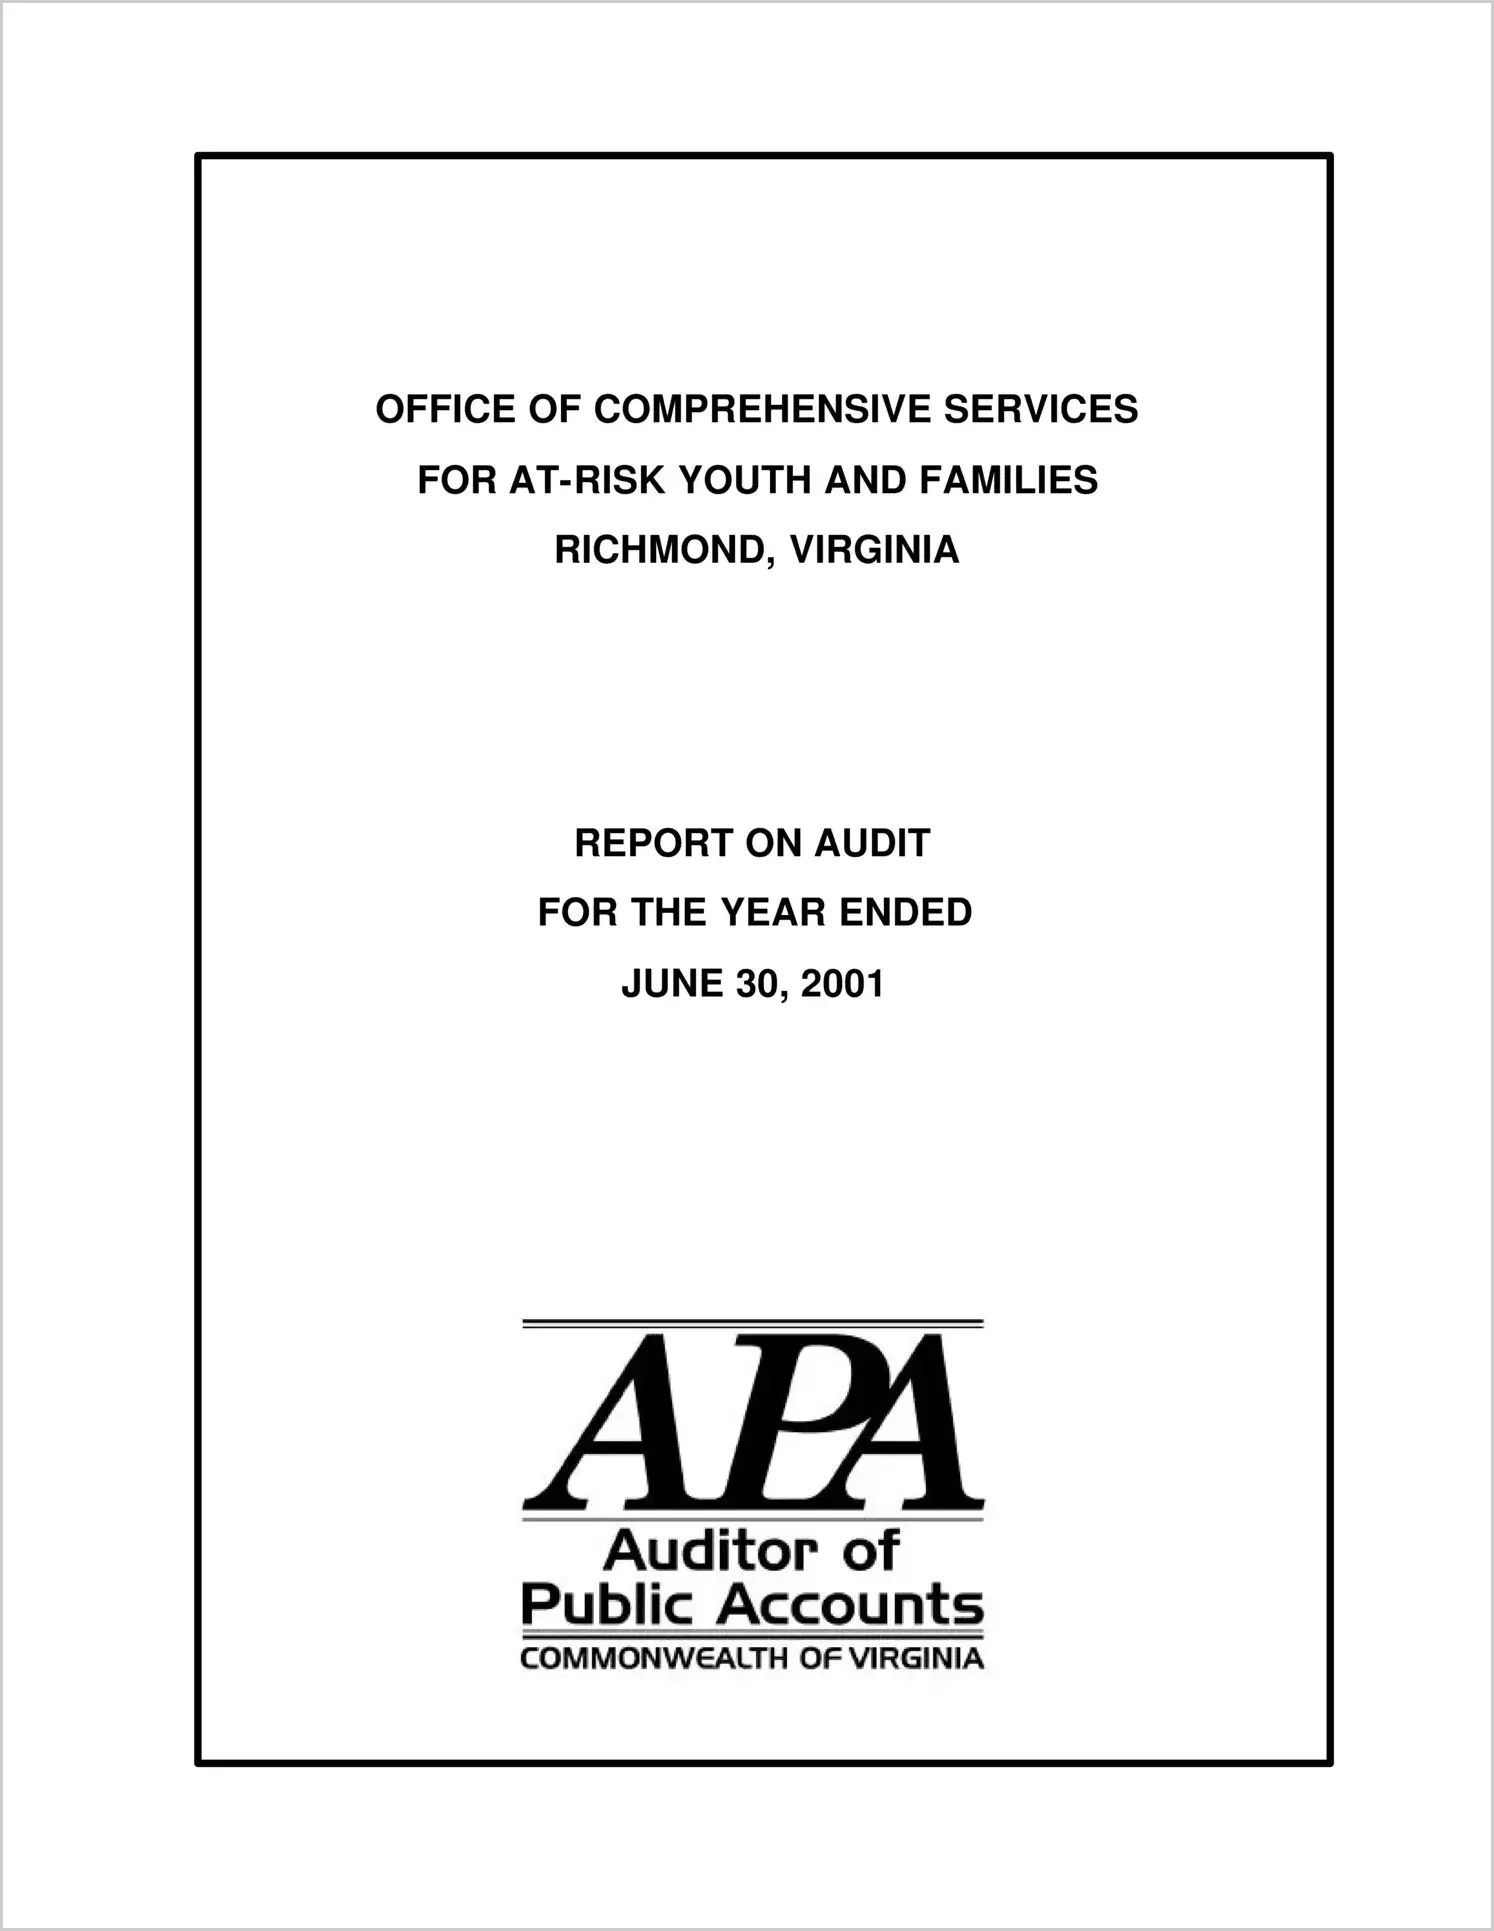 Office of Comprehensive Services for At-Risk Youth and Families for the year ended June 30, 2001